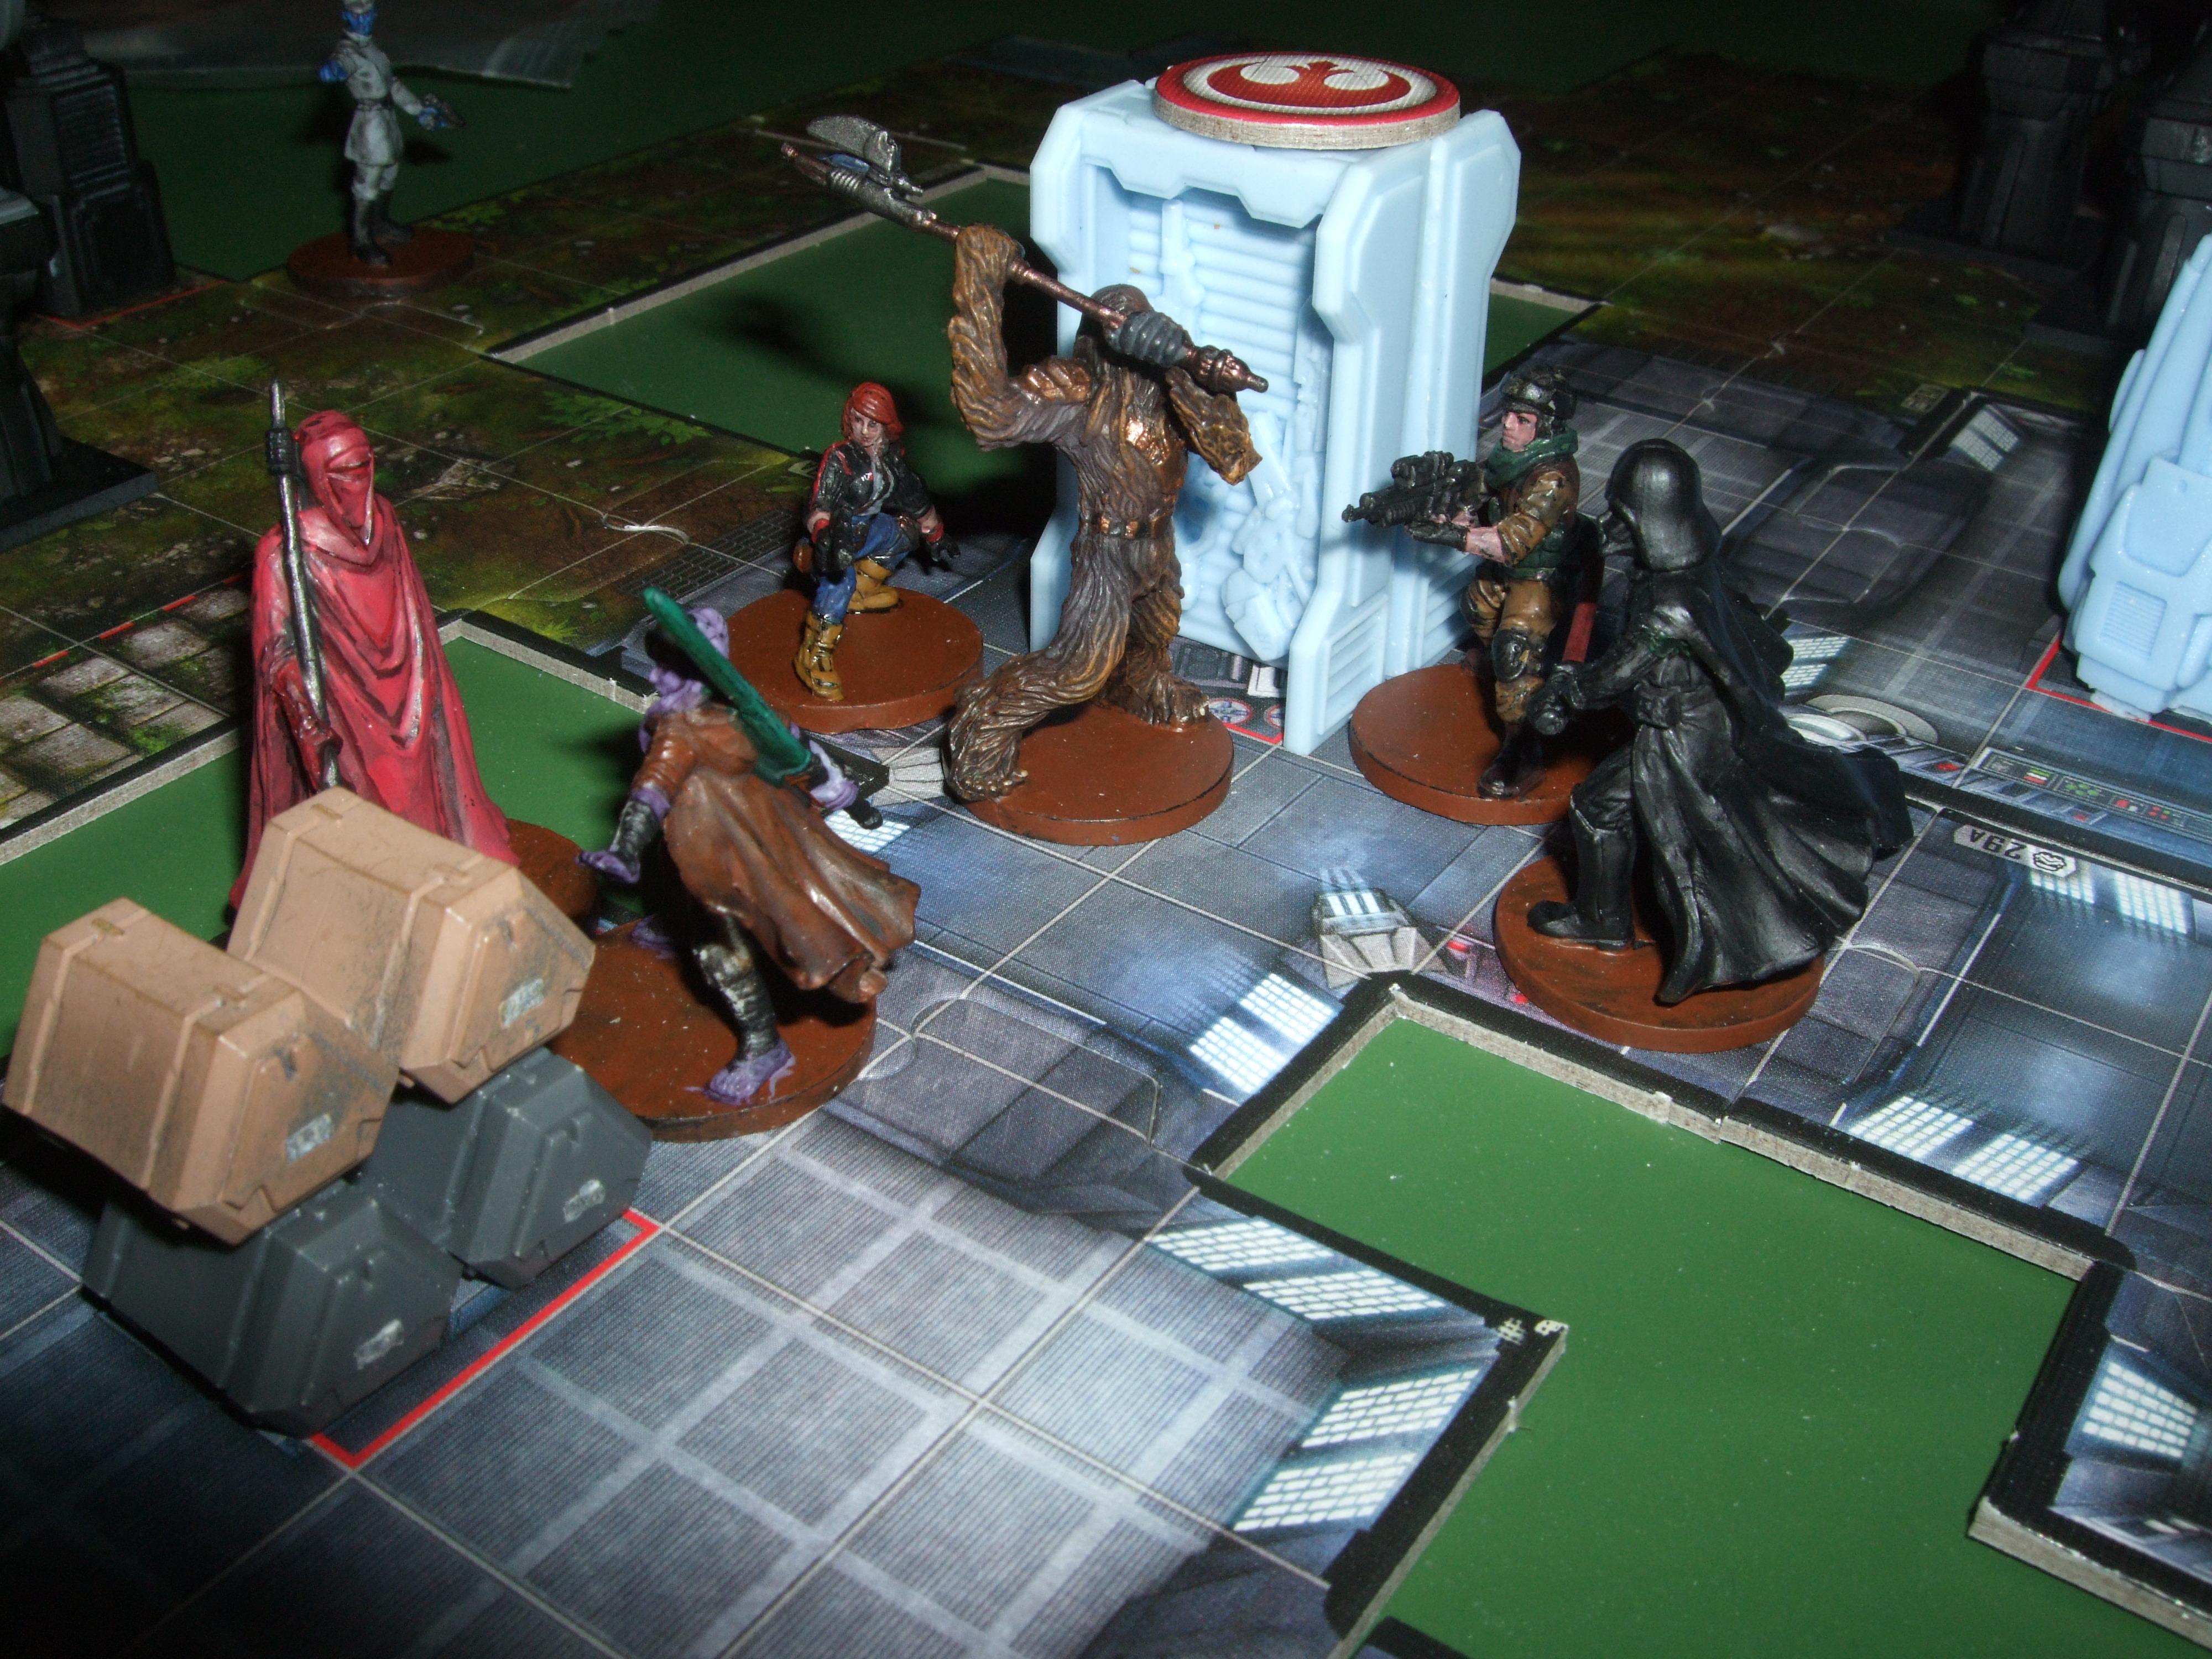 Campaign, Imperial Assault, Jedi, Star Wars, Storm Troopers, Under Siege, Wookiee